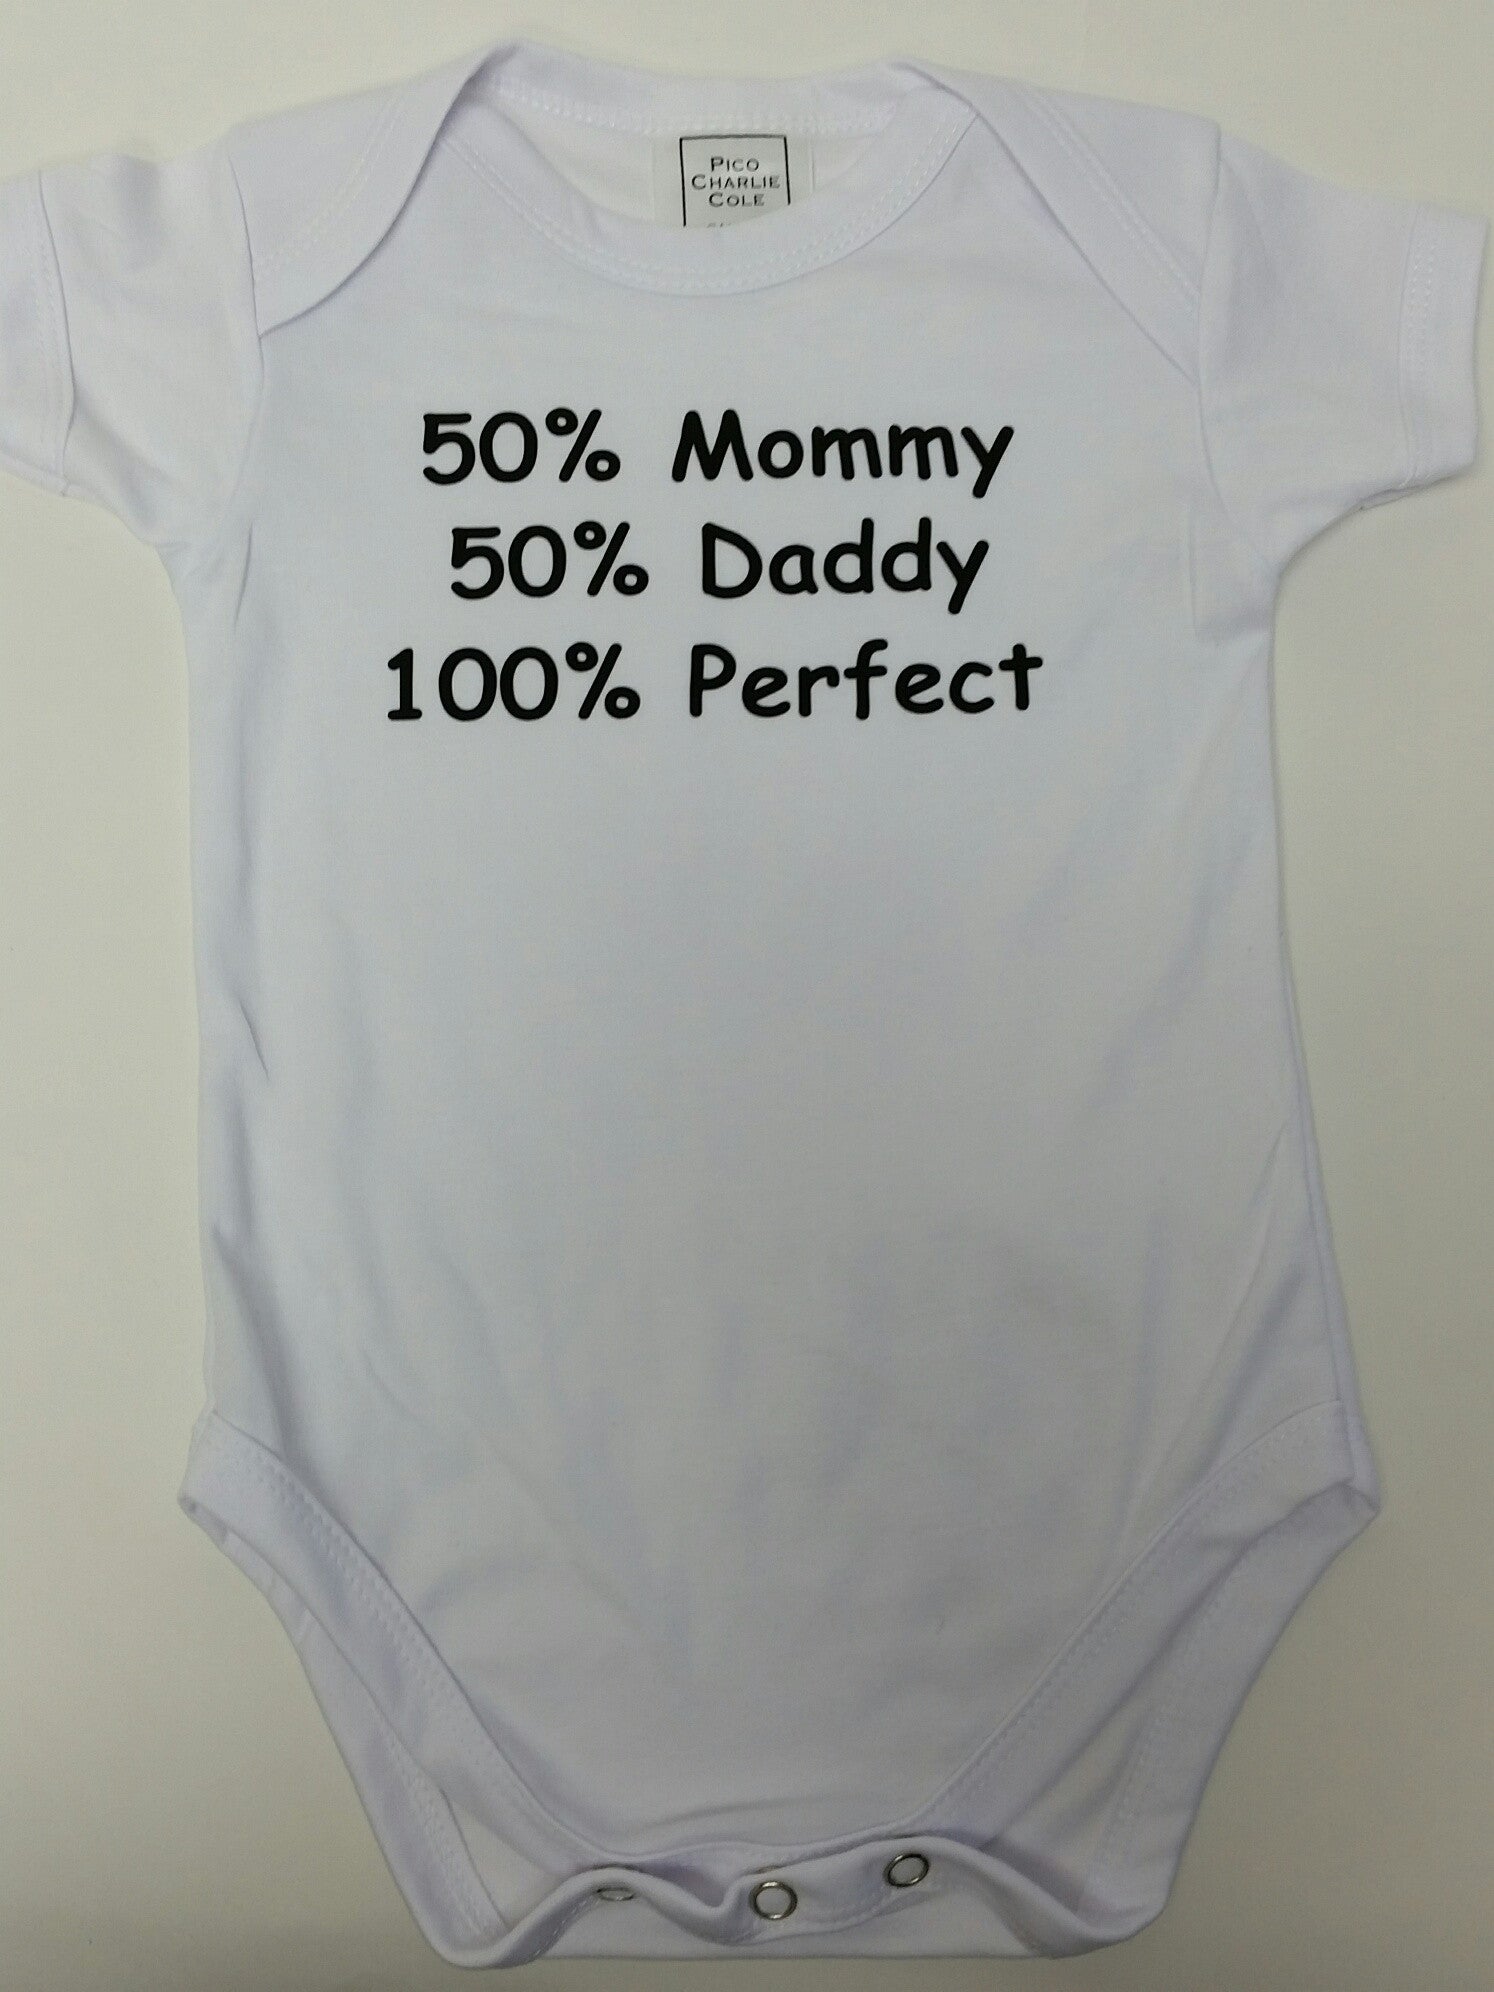 50% Mommy 50% Daddy 100% Perfect baby one piece. Made of 100% cotton. Heat pressed.